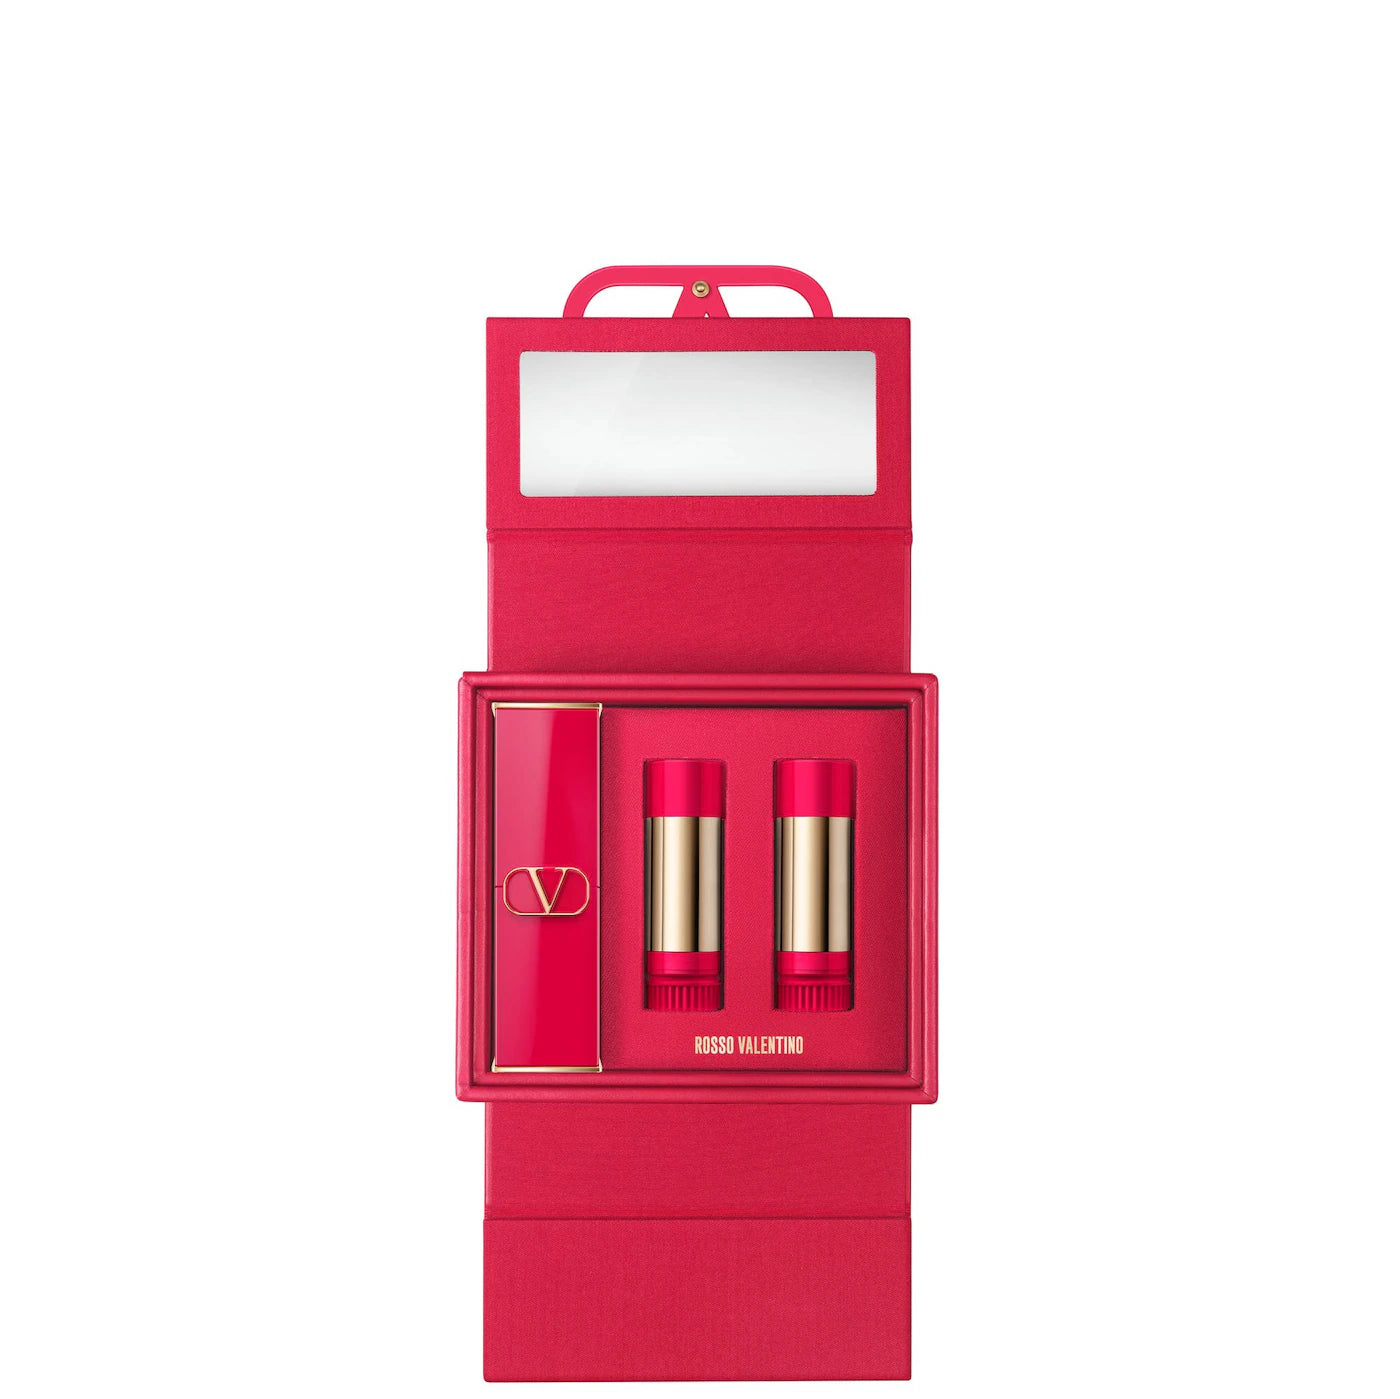 Valentino Beauty The Rosso Valentino Couture Lipstick Set (Limited Edition)